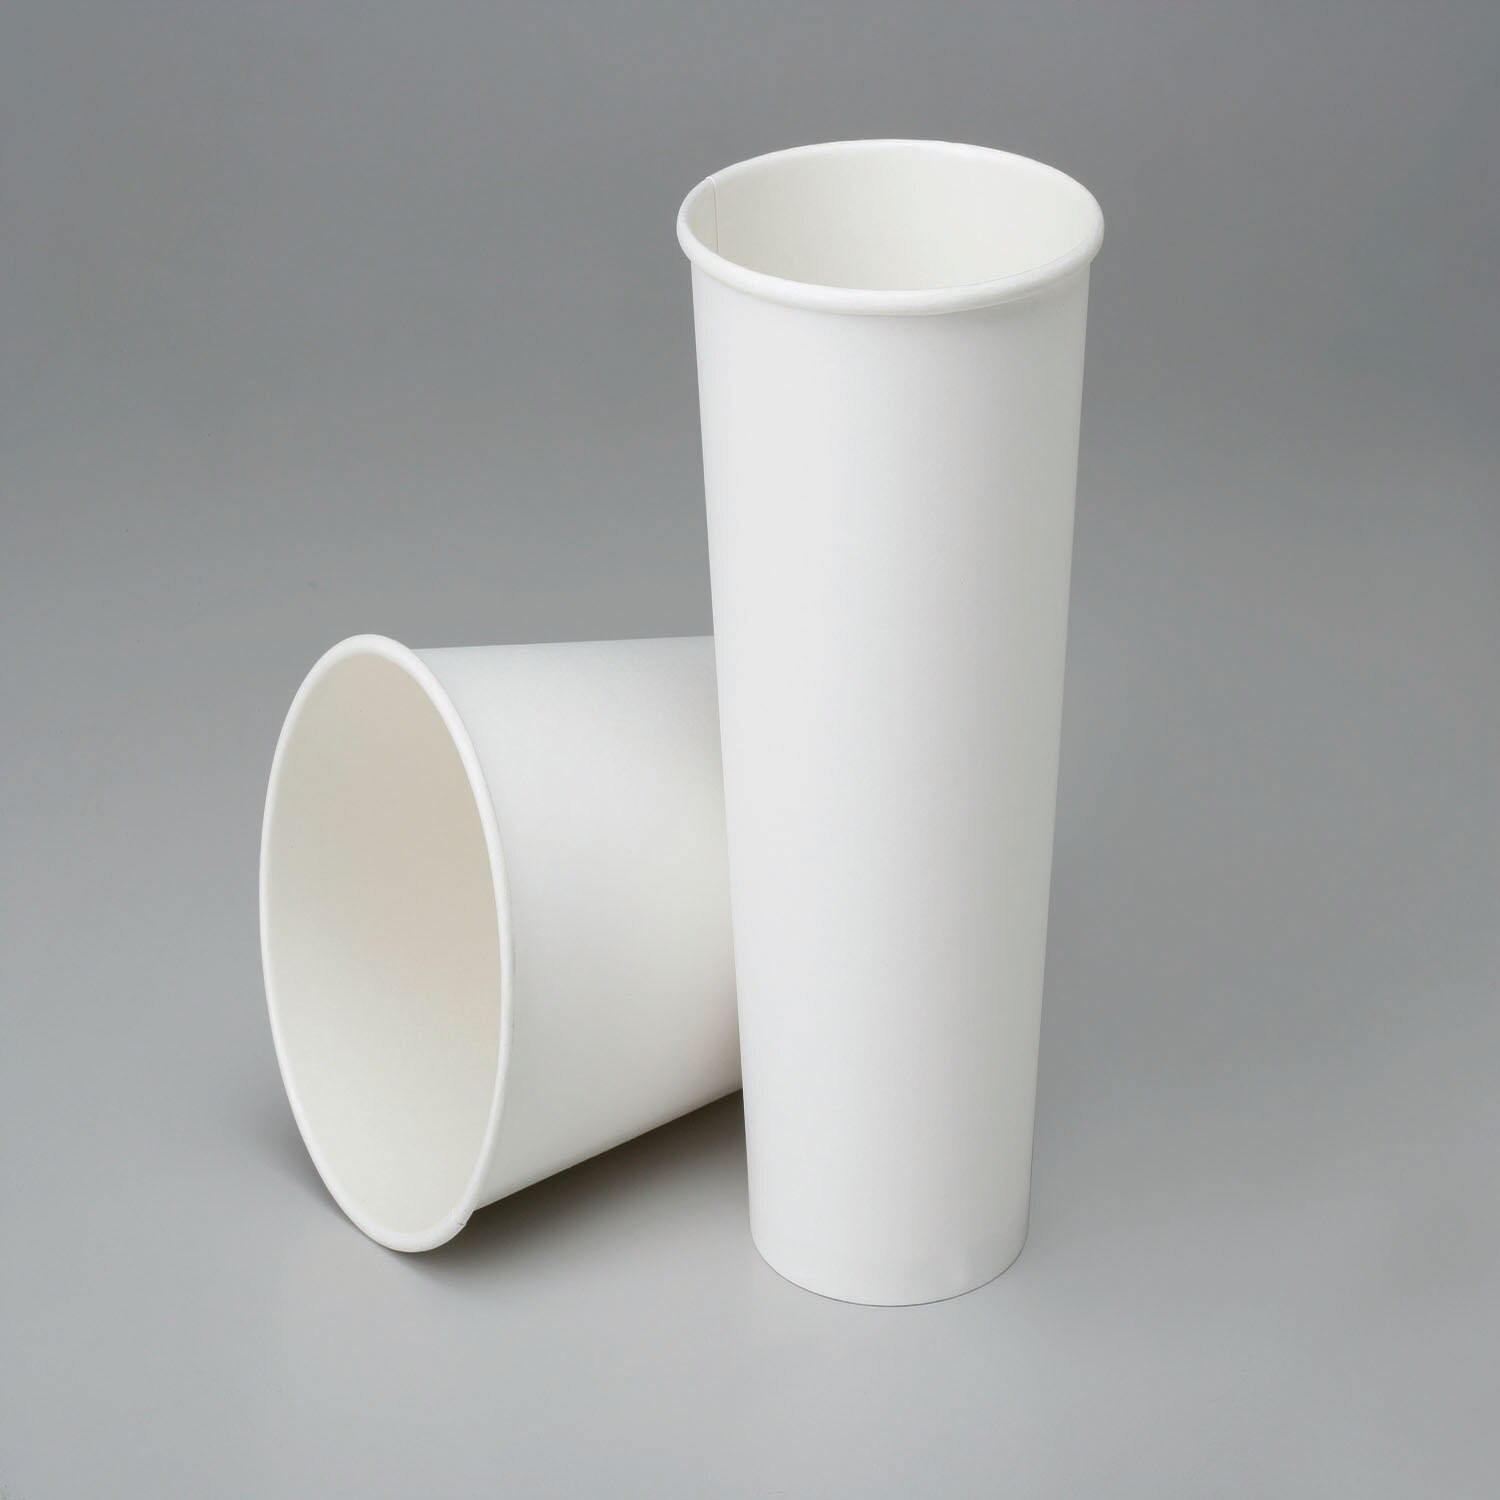 Cup, Disposable, Paper, Cold Beverage, White, 32 oz.